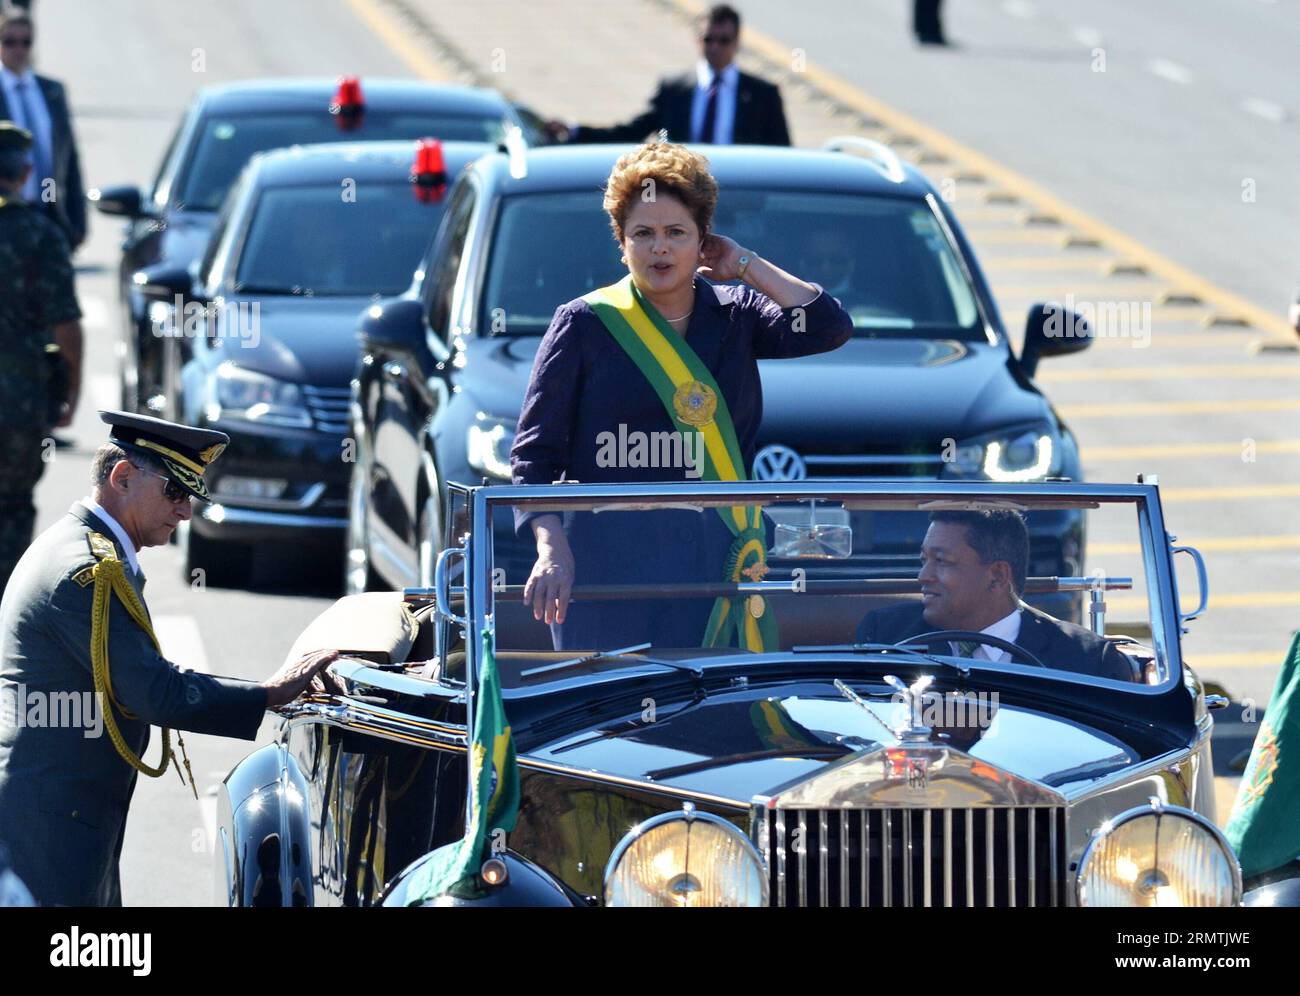 (140907) -- BRASILIA, Sept. 7, 2014 -- Brazilian President Dilma Rousseff (C), takes part in a military parade to commemorate the Independence s Day of Brazil, in Brasilia, Brazil, on Sept. 7, 2014. Brazil celebrates the 192th anniversary of its independence on Sunday. Renato Costa/Fram/Estadao Conteudo/) (vf) (fnc) BRAZIL OUT BRAZIL-BRASILIA-POLITICS-INDEPENDENCE DAY AGENCIAxESTADO PUBLICATIONxNOTxINxCHN   Brasilia Sept 7 2014 Brazilian President Dilma Rousseff C Takes Part in a Military Parade to commemorate The Independence S Day of Brazil in Brasilia Brazil ON Sept 7 2014 Brazil celebrates Stock Photo